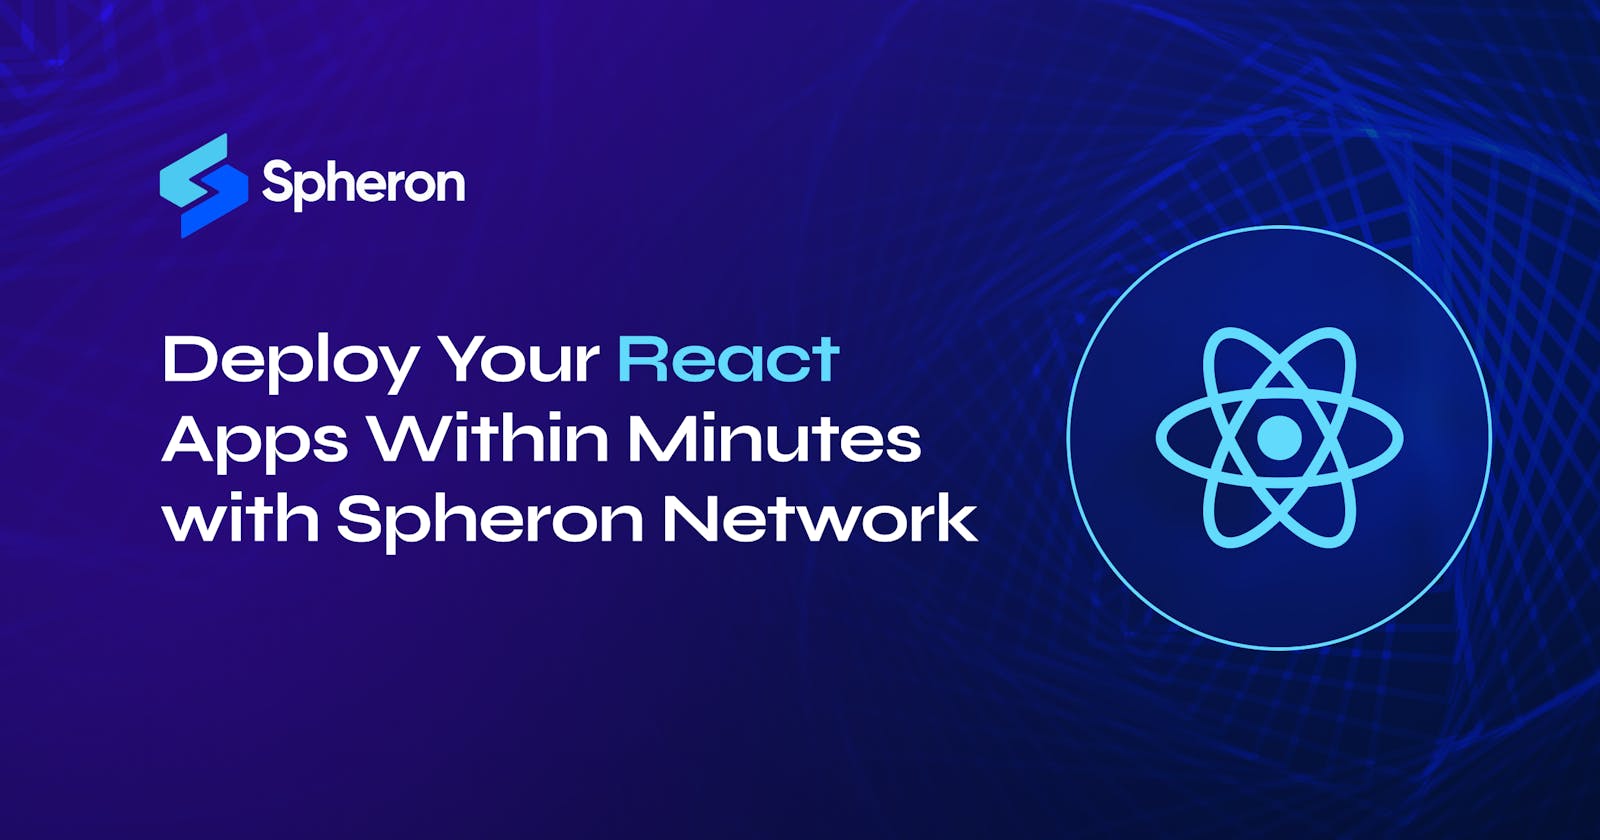 Deploy Your React Apps Within Minutes with Spheron Network